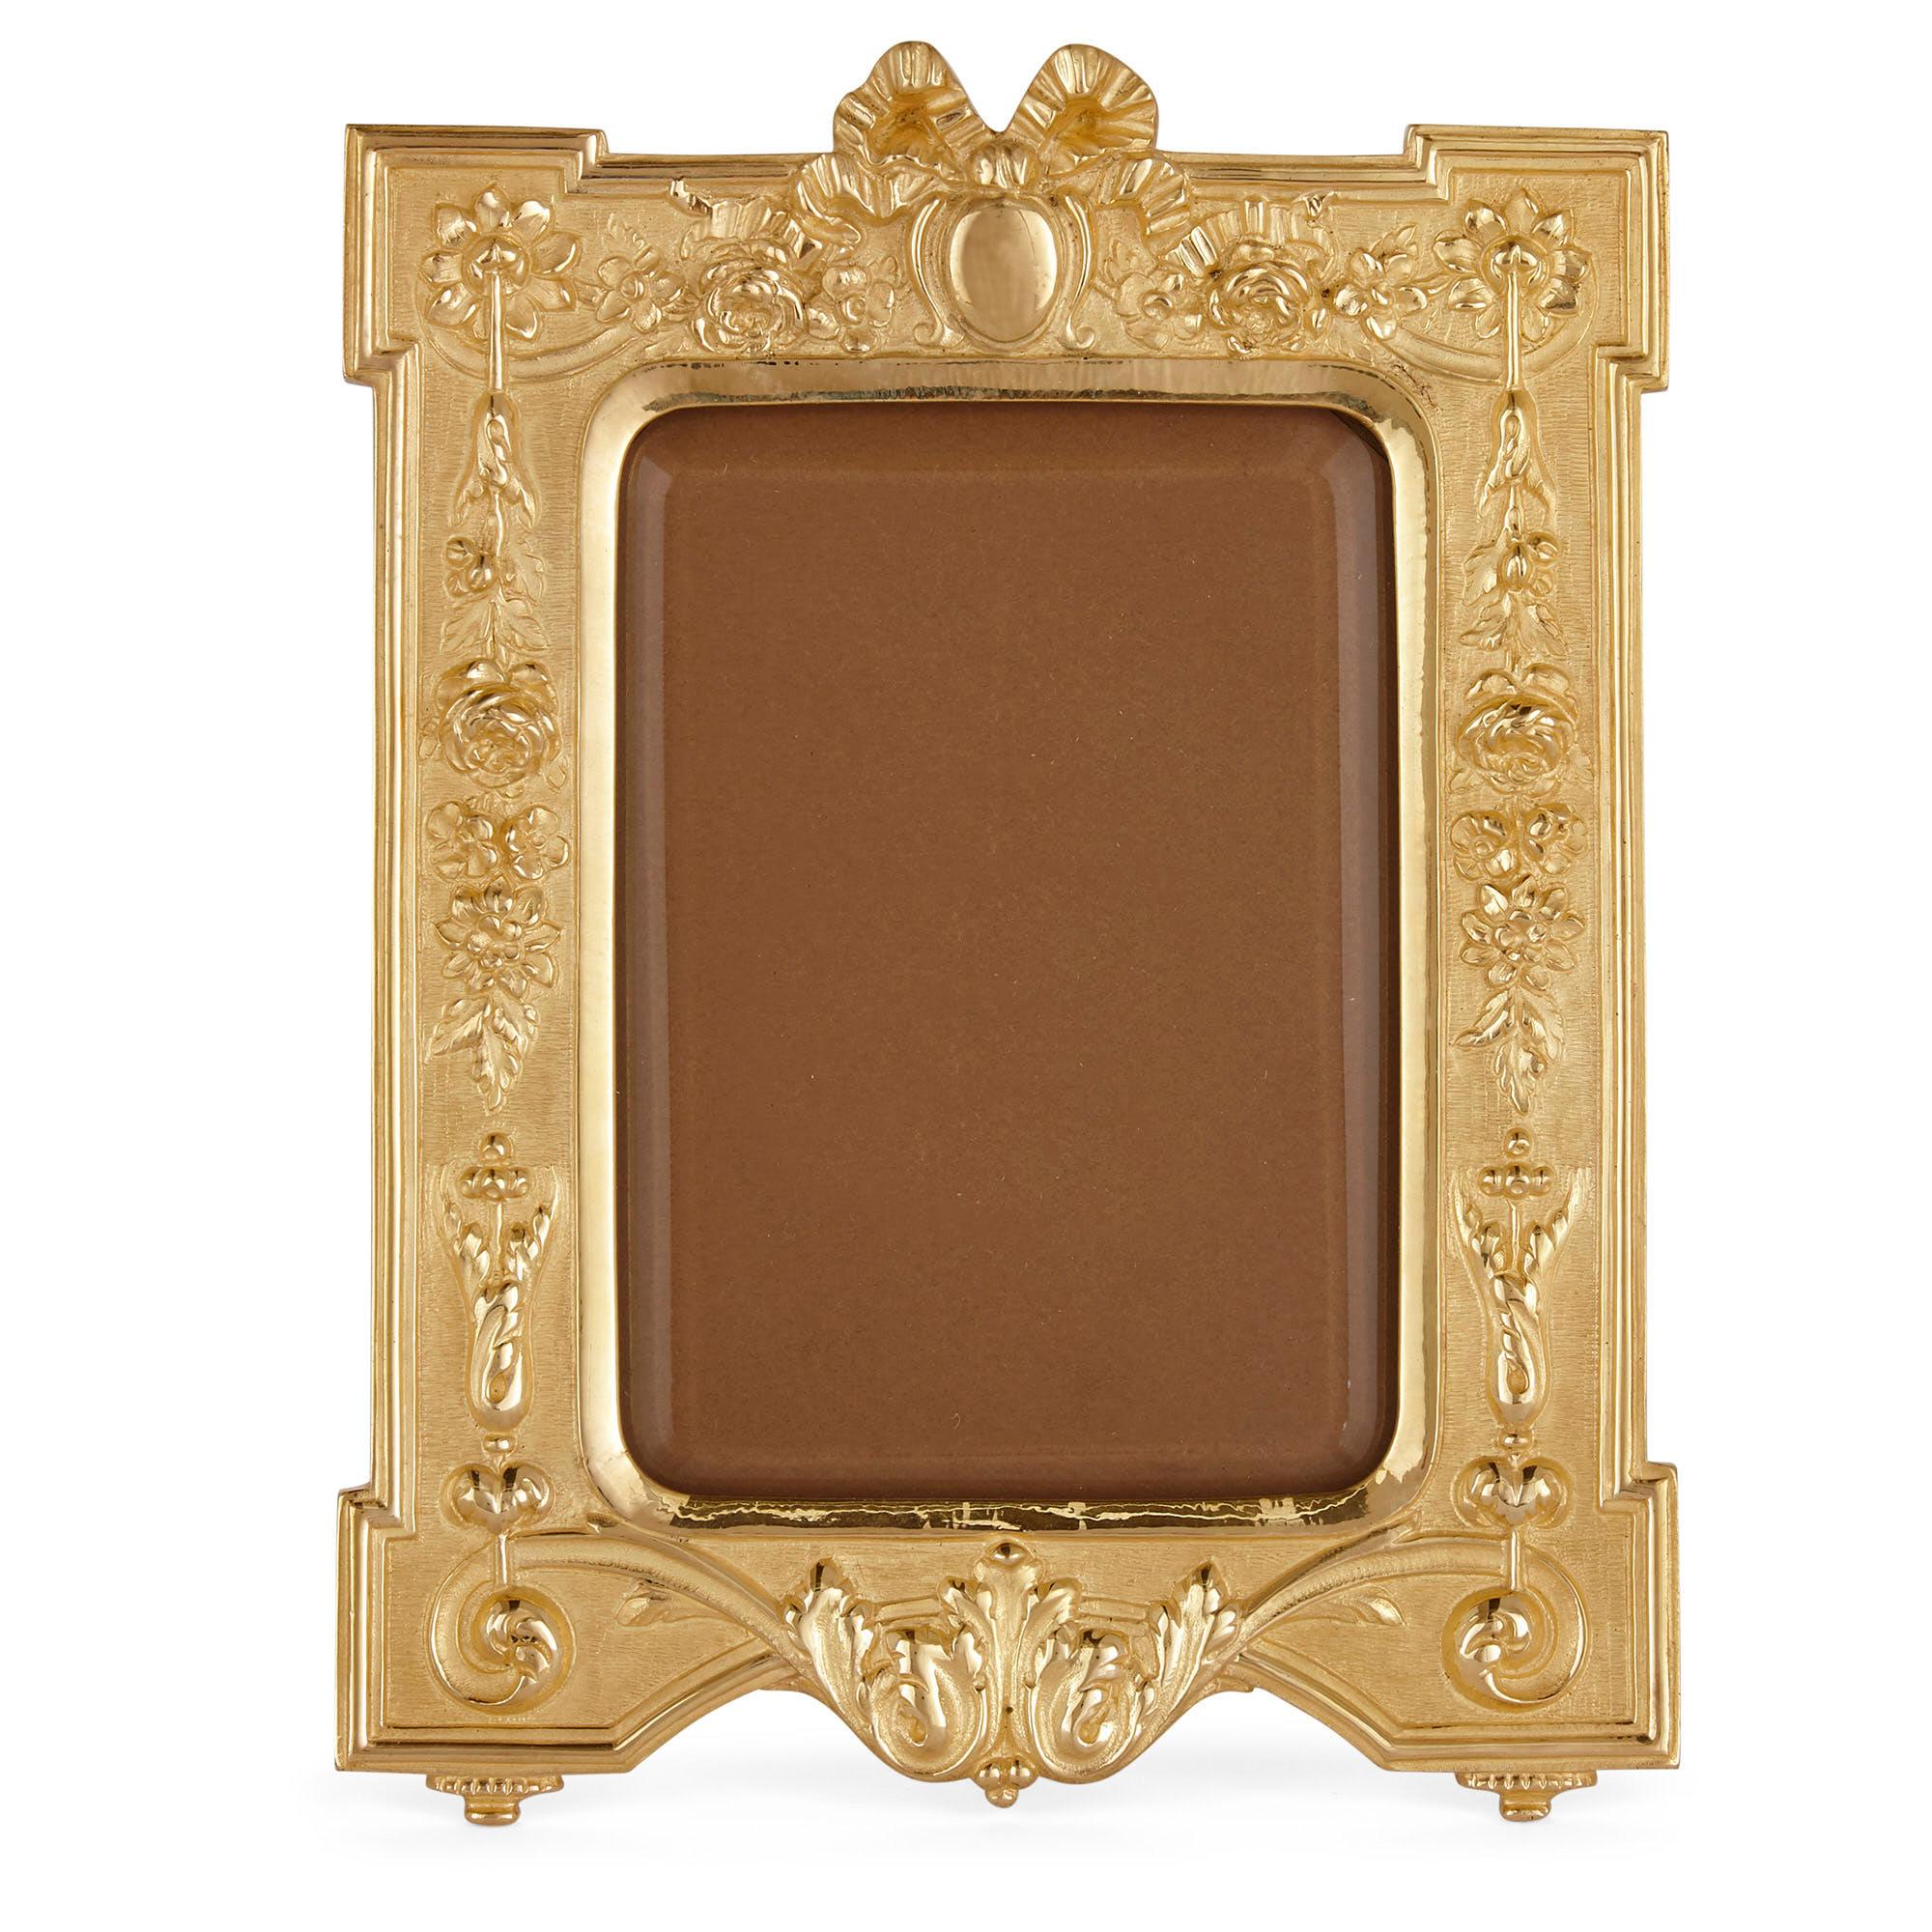 Pair of French gilt bronze photograph frames in the Neoclassical style
French, early 20th century
Measures: Height 22cm, width 16.5cm, depth 2cm

These superb photograph frames are designed in the Neoclassical manner from gilt bronze. The